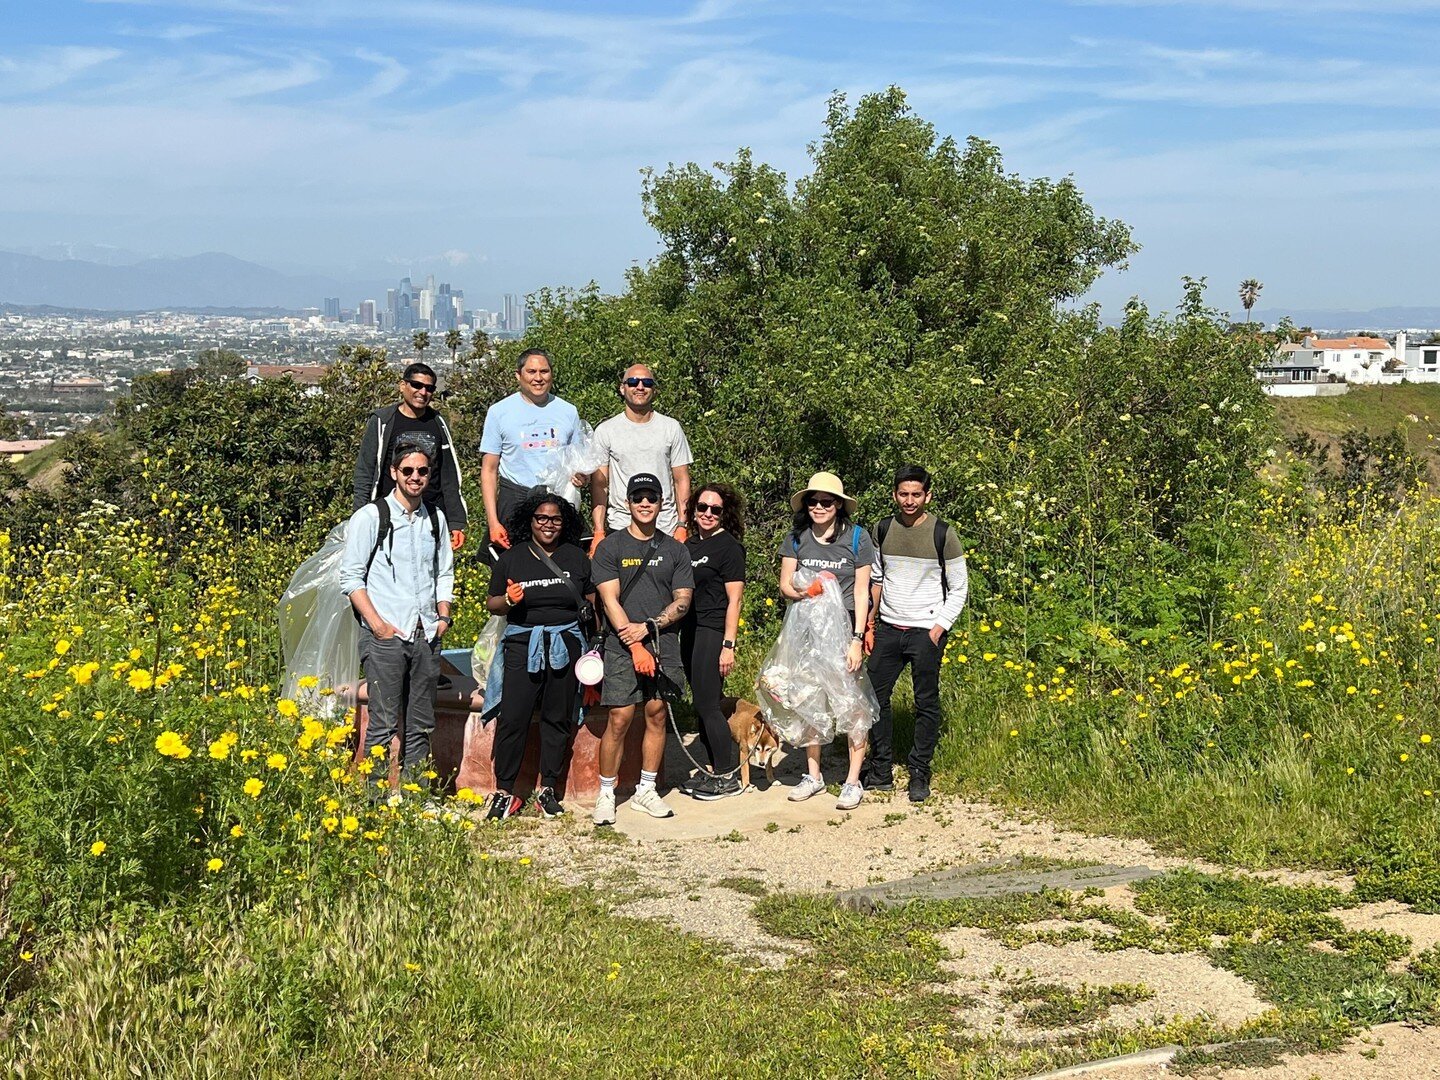 Happy Earth Day! 🌎

🌼 This week, our CTO (and resident native California plant enthusiast) Ken Weiner was joined by our LA-based GumGummers for a hike and clean-up through Kenneth Hahn Park.

🛶 Earlier this month, our Sydney team members kayaked t